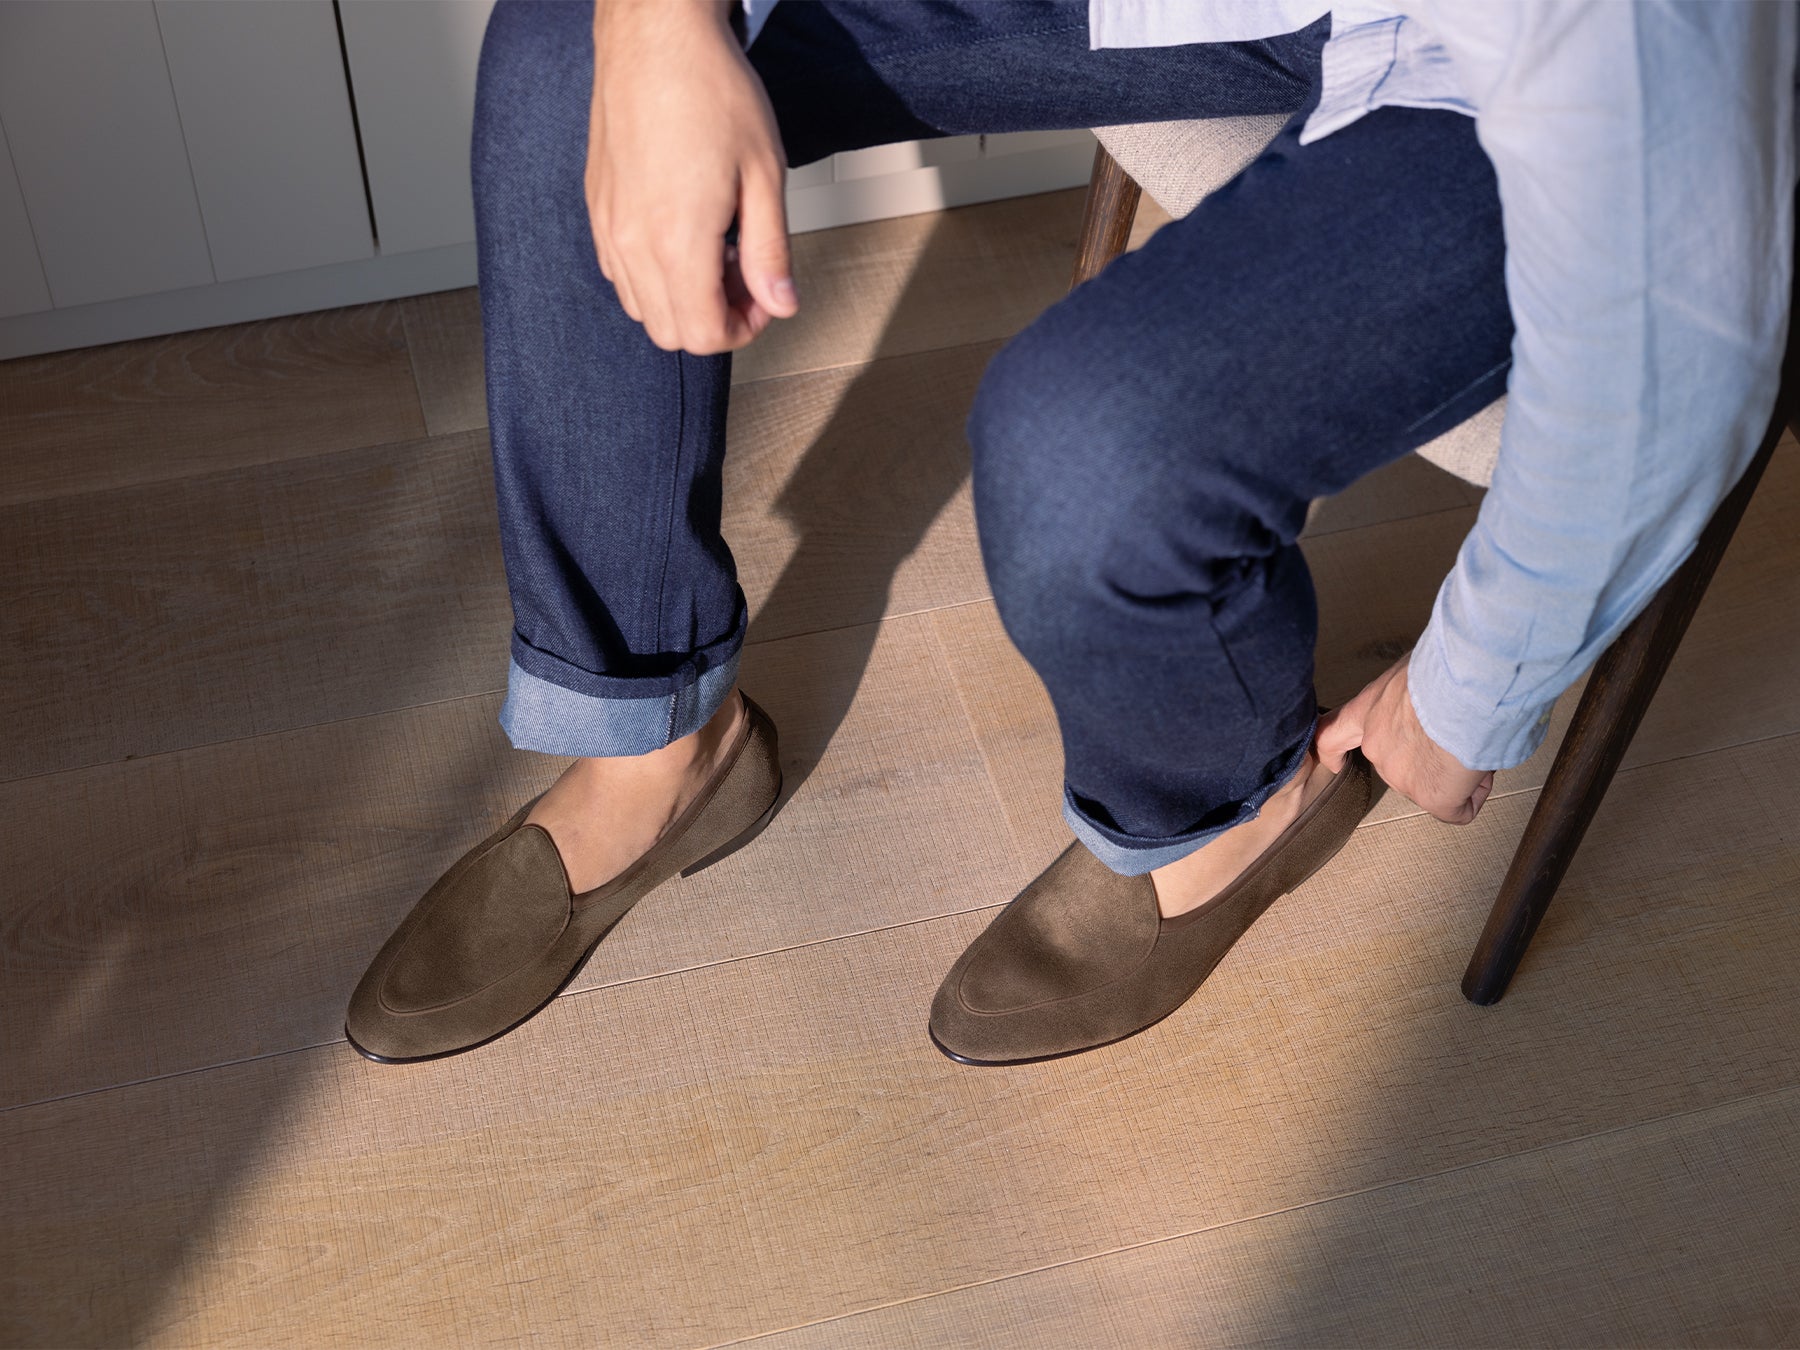 The Iconic Sagan Classic Loafers